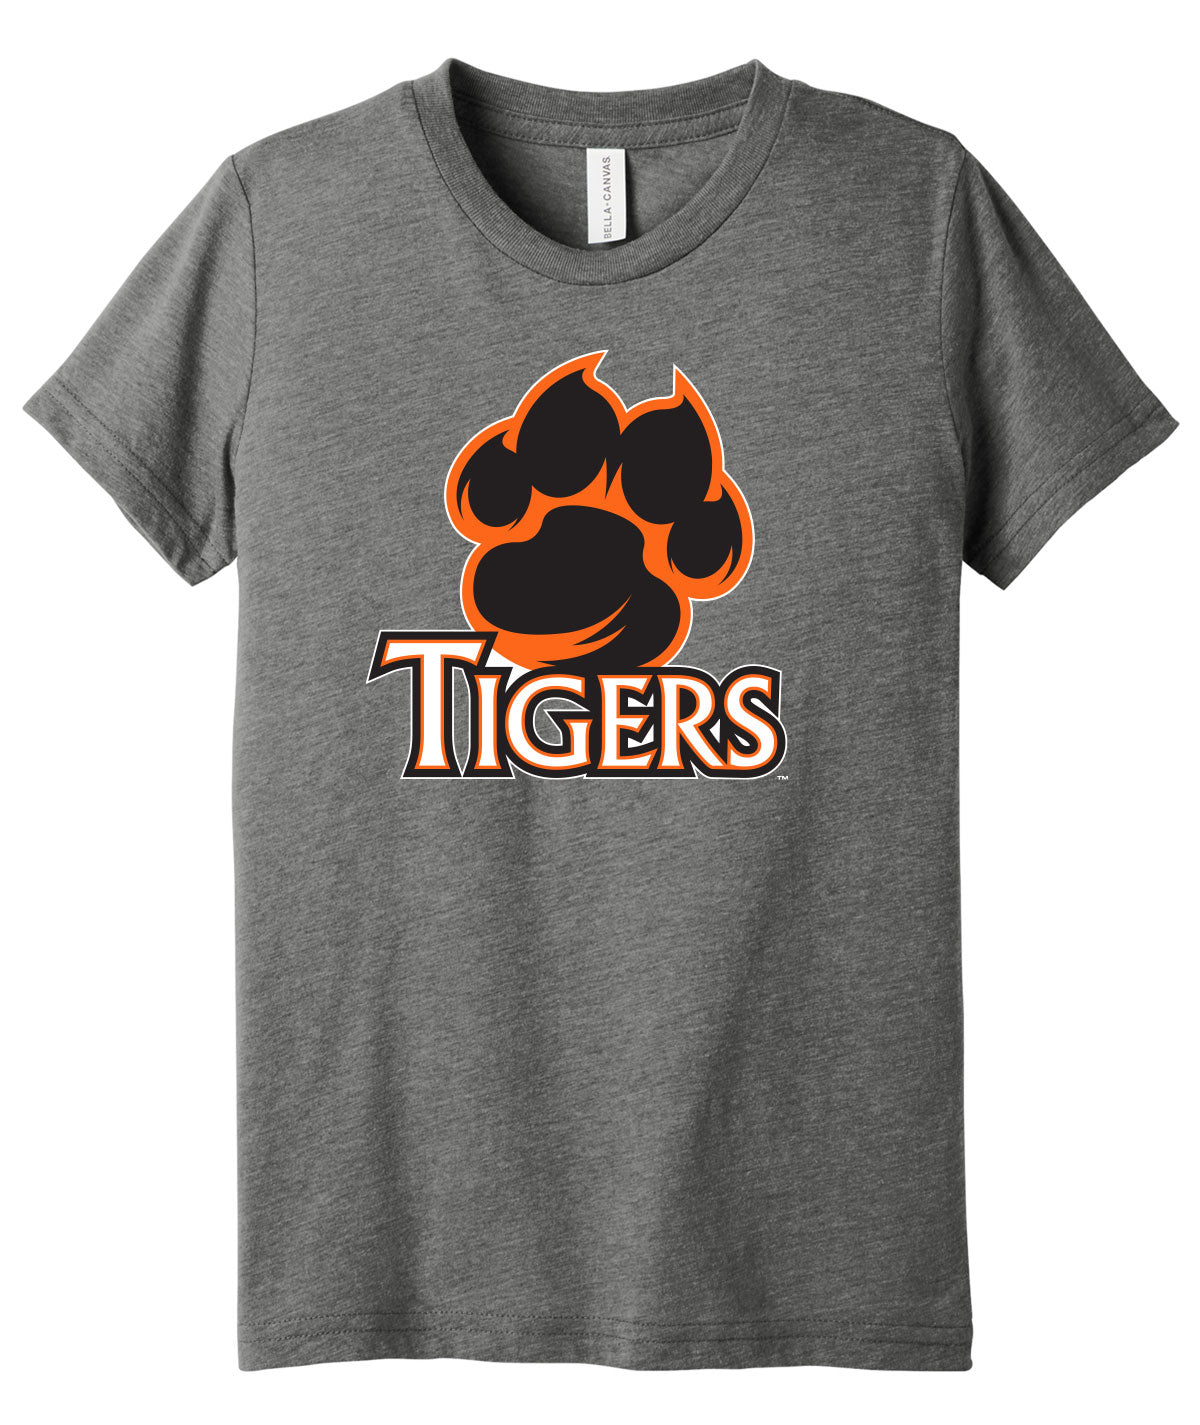 Tigers Triblend Youth Tee